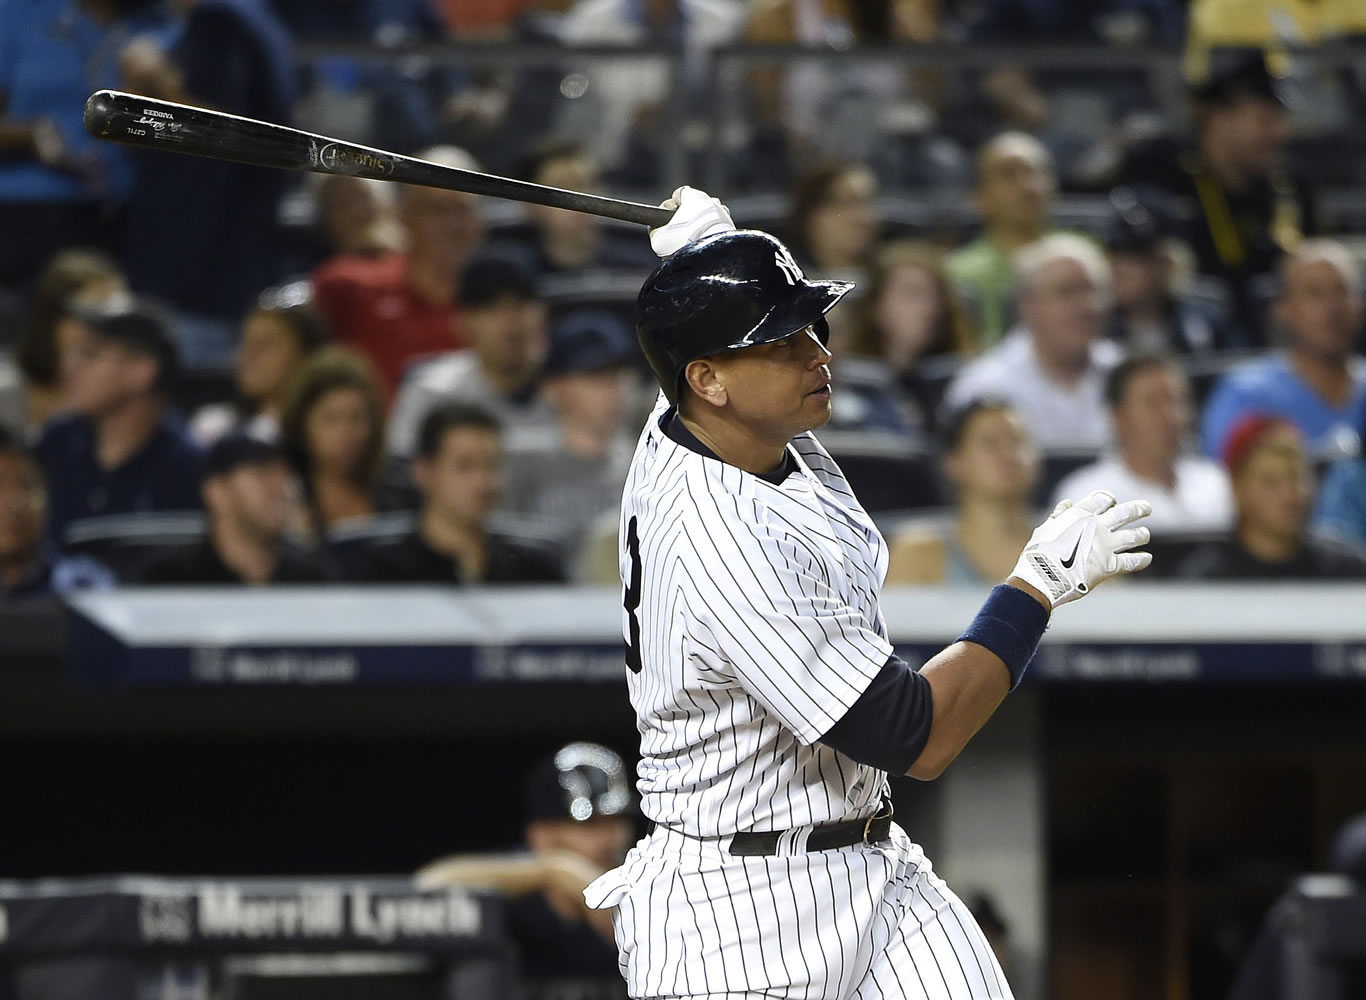 New York Yankees designated hitter Alex Rodriguez watches his solo home run off Seattle Mariners relief pitcher Joe Beimel during the seventh inning at Yankee Stadium on Friday, July 17, 2015, in New York.